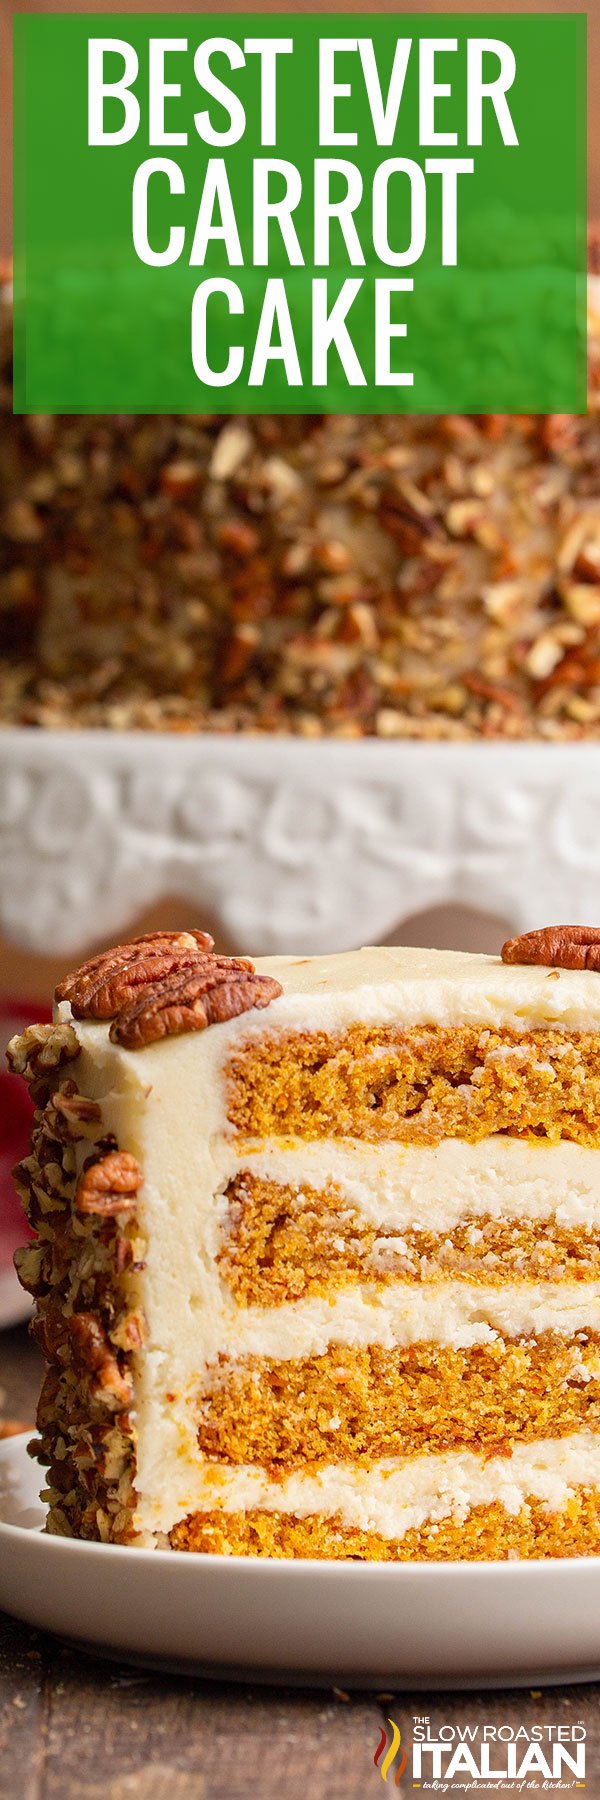 Best Ever Old Fashioned Carrot Cake - PIN